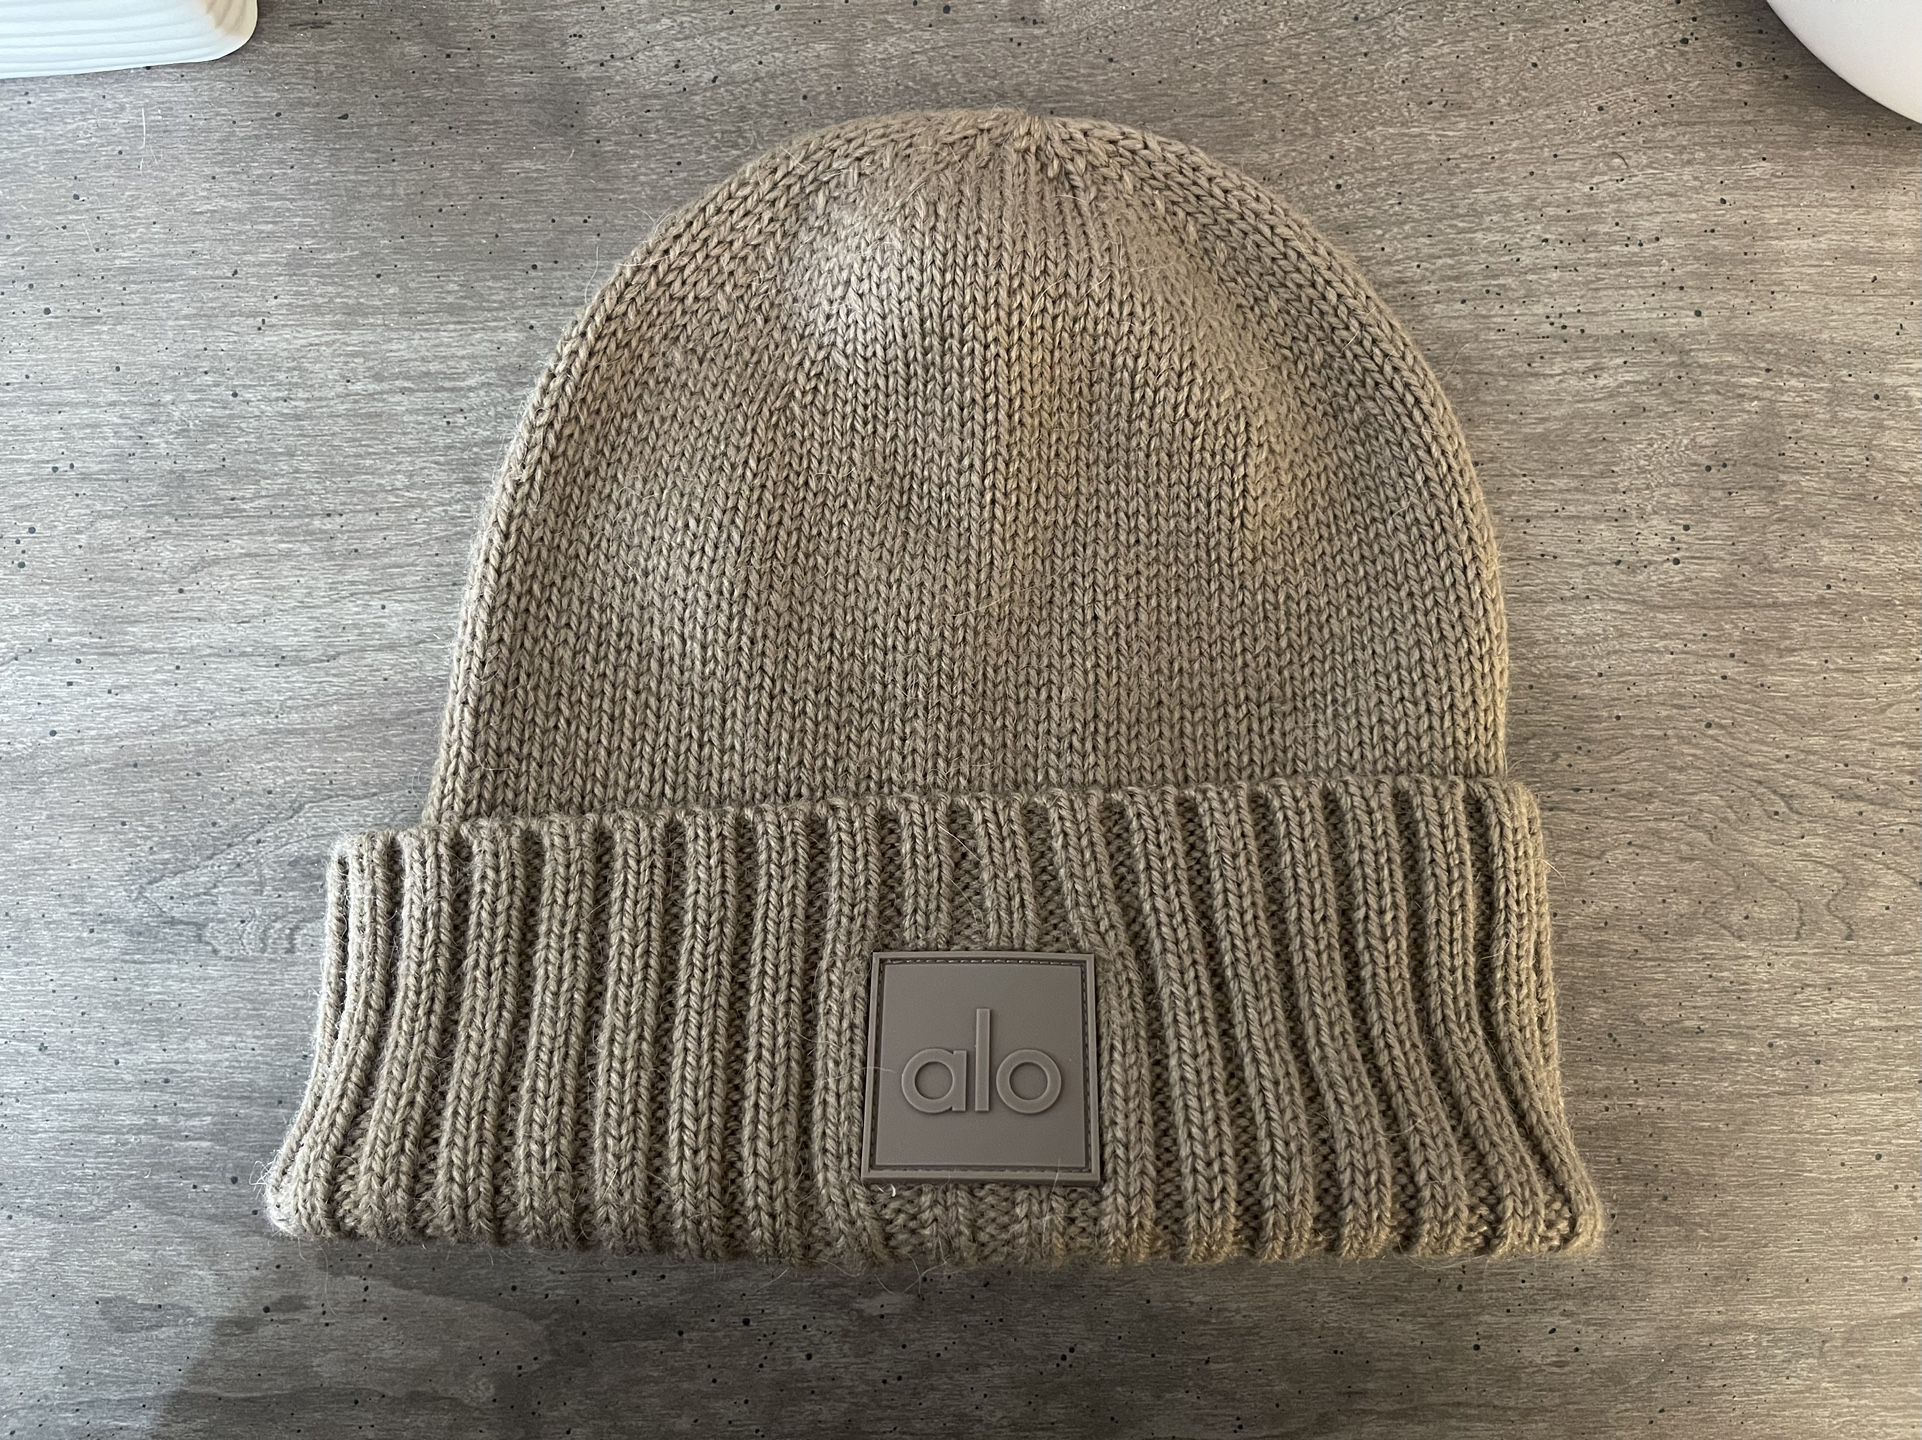 Alo Yoga Beanie for Sale in Kissimmee, FL - OfferUp